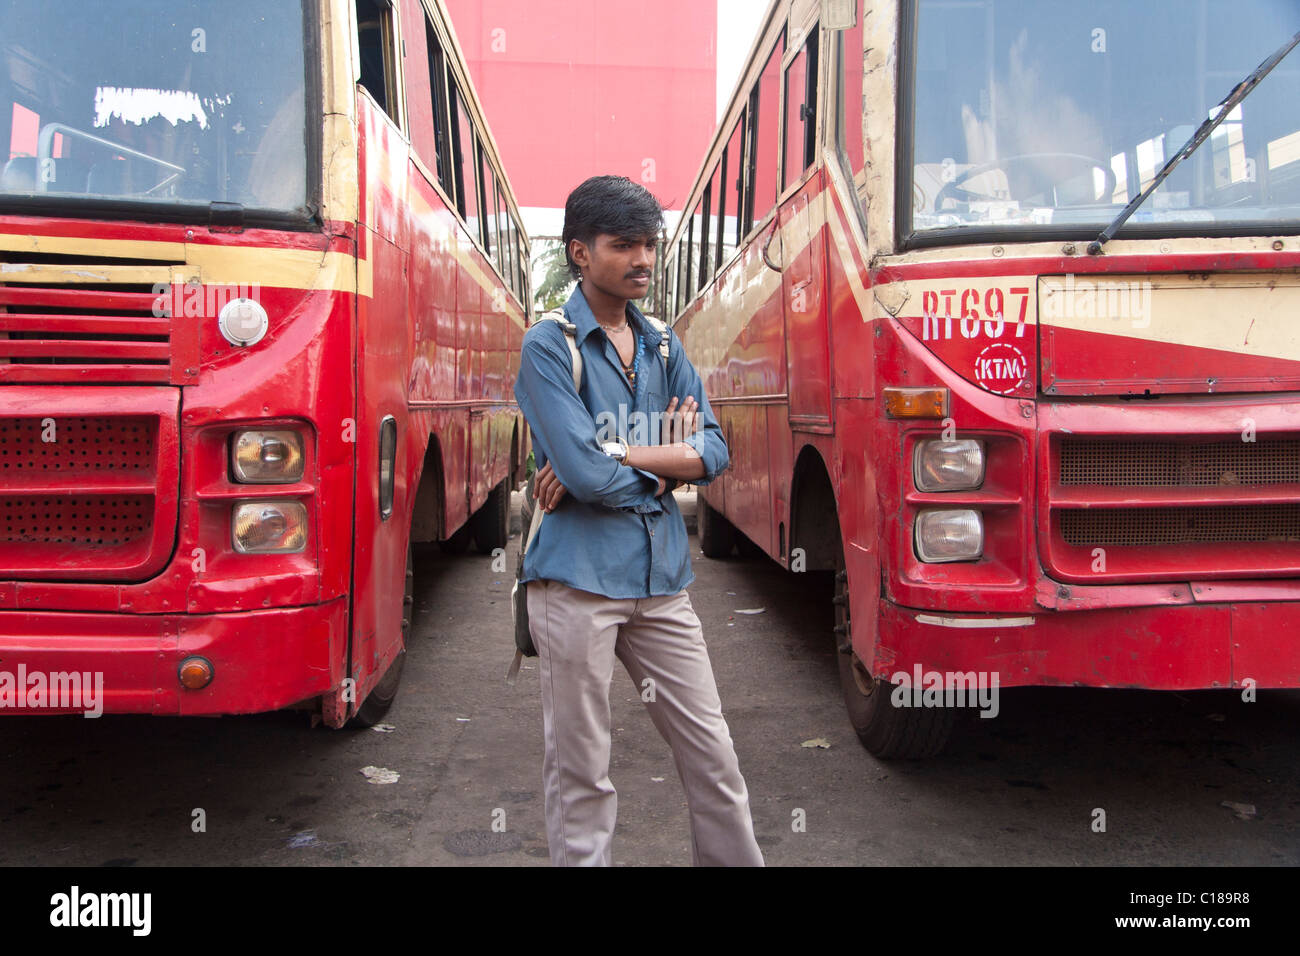 India boy waiting for the bus at the bus station Stock Photo